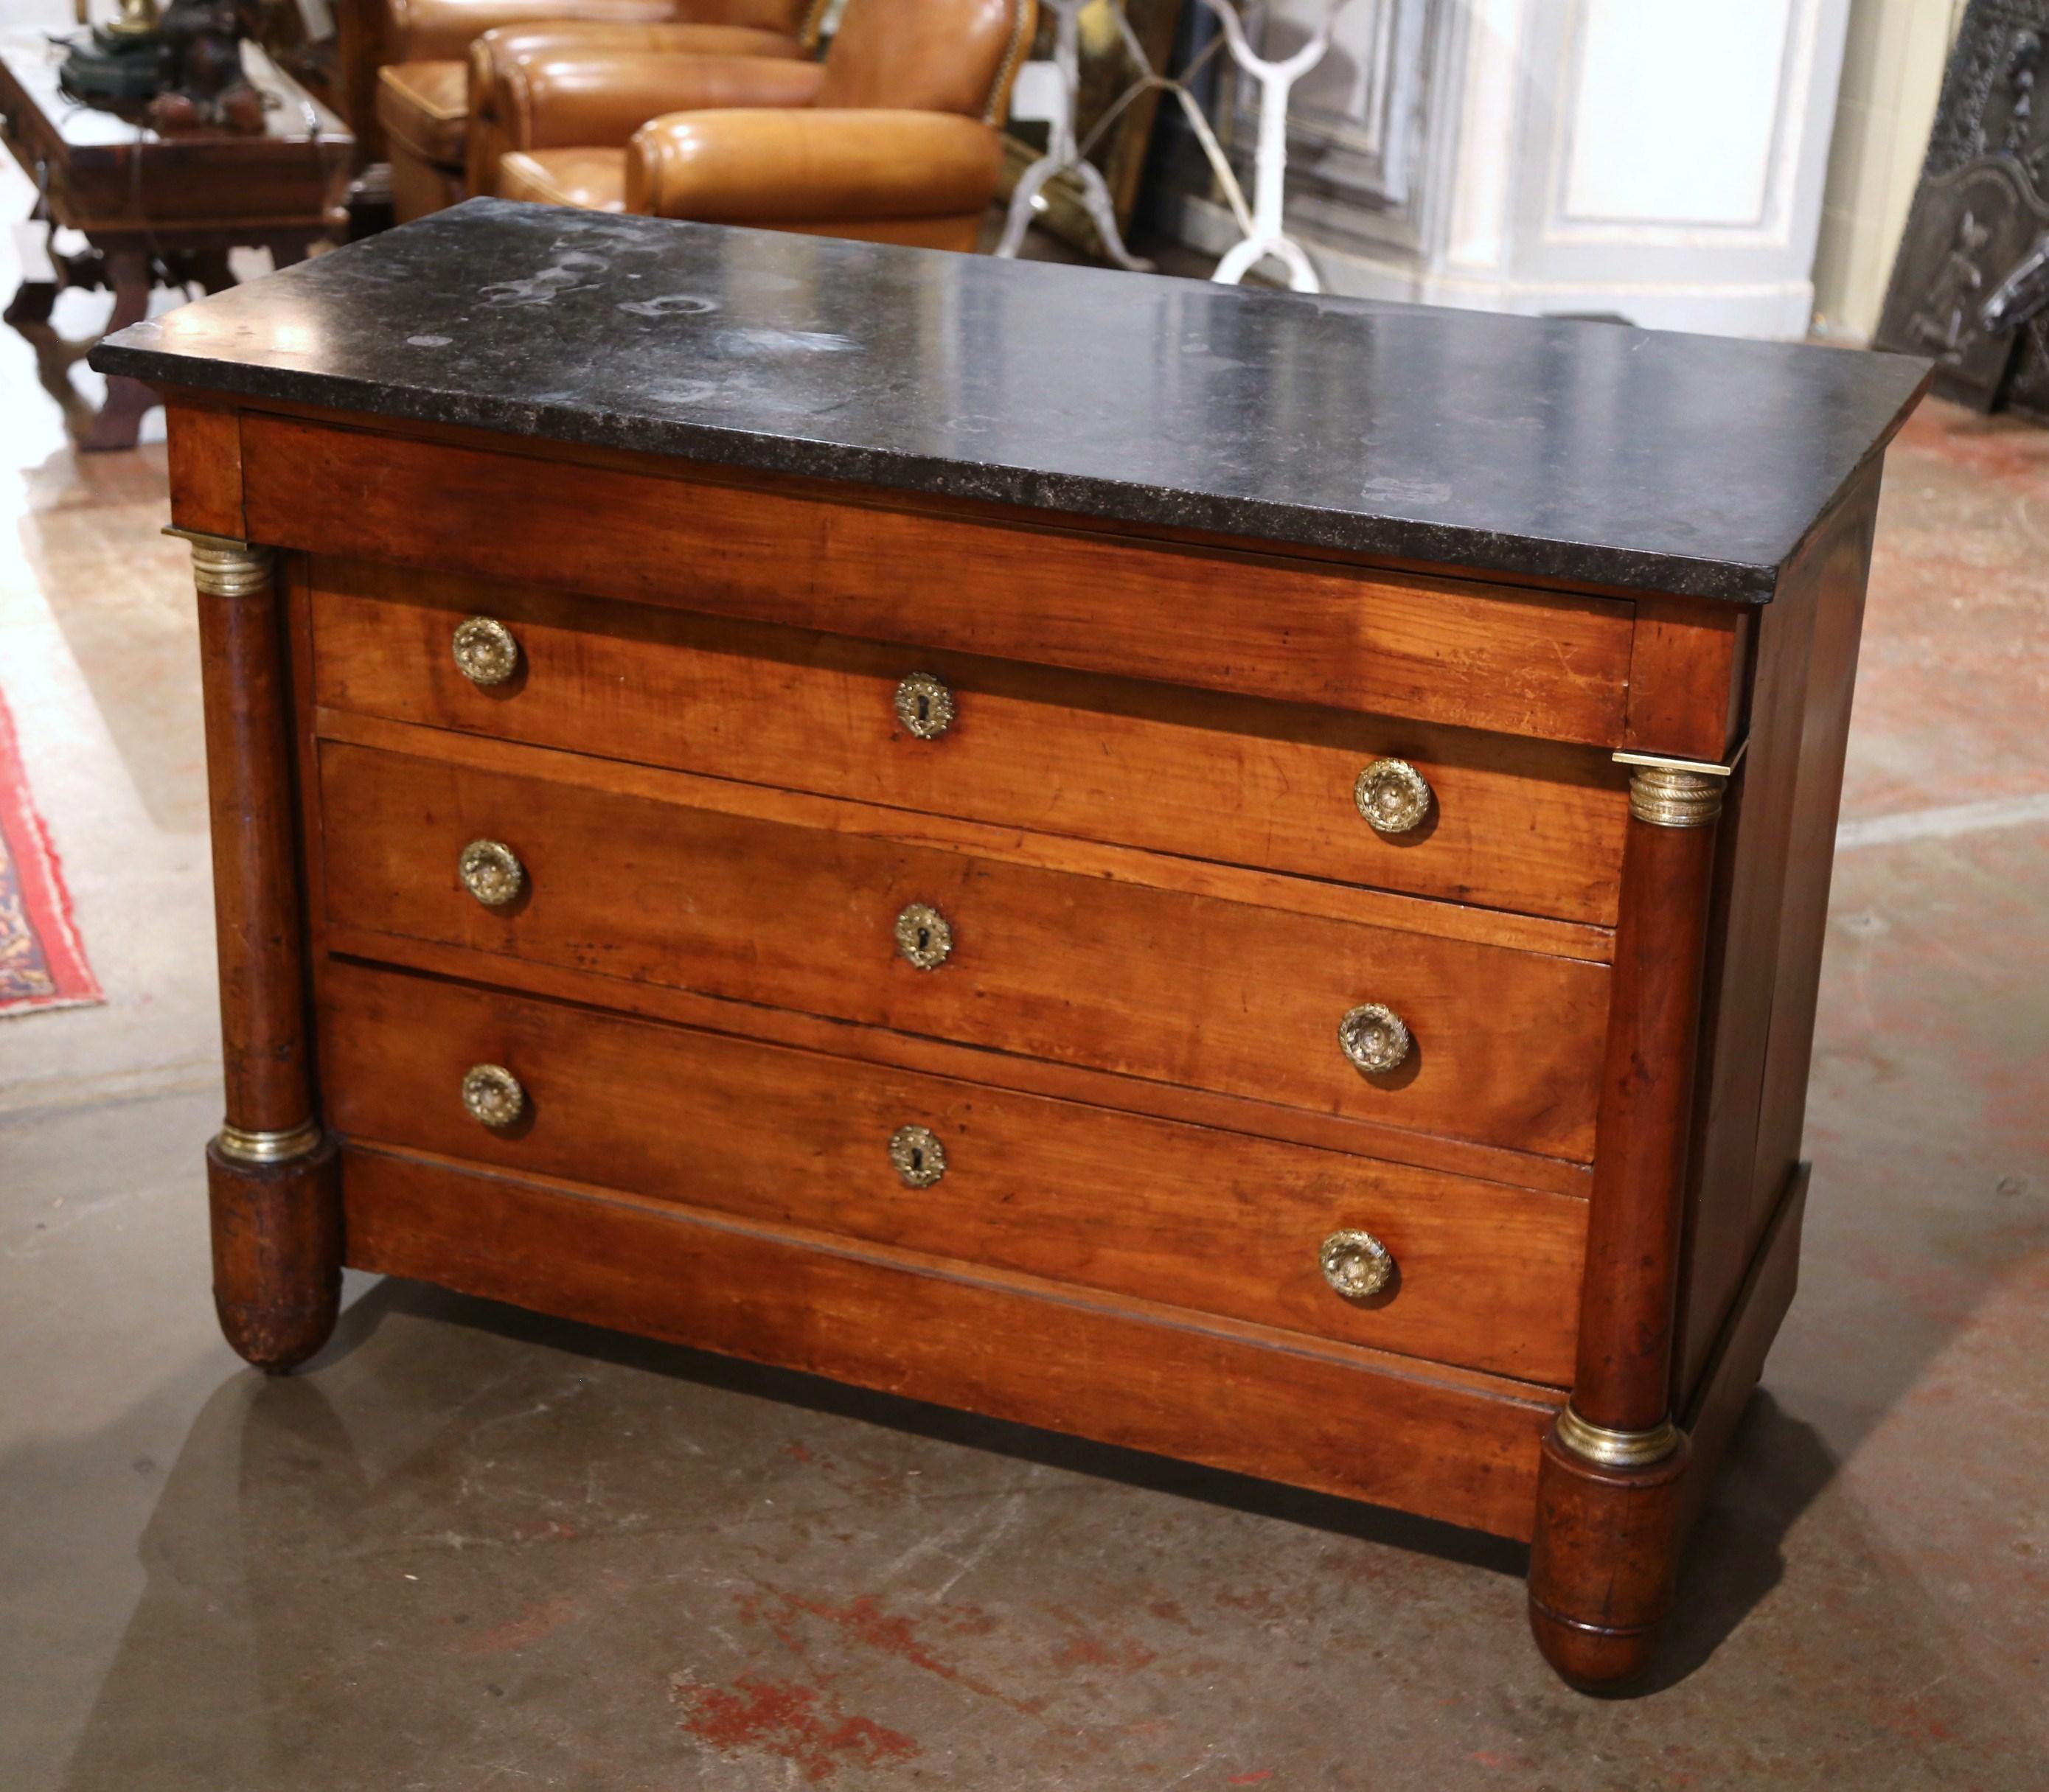 This elegant fruitwood chest of drawers was crafted in France, circa 1860. The traditional commode sits on round columnar feet over a straight bottom plinth, and is embellished on both sides by carved round columns with decorative bronze rings at